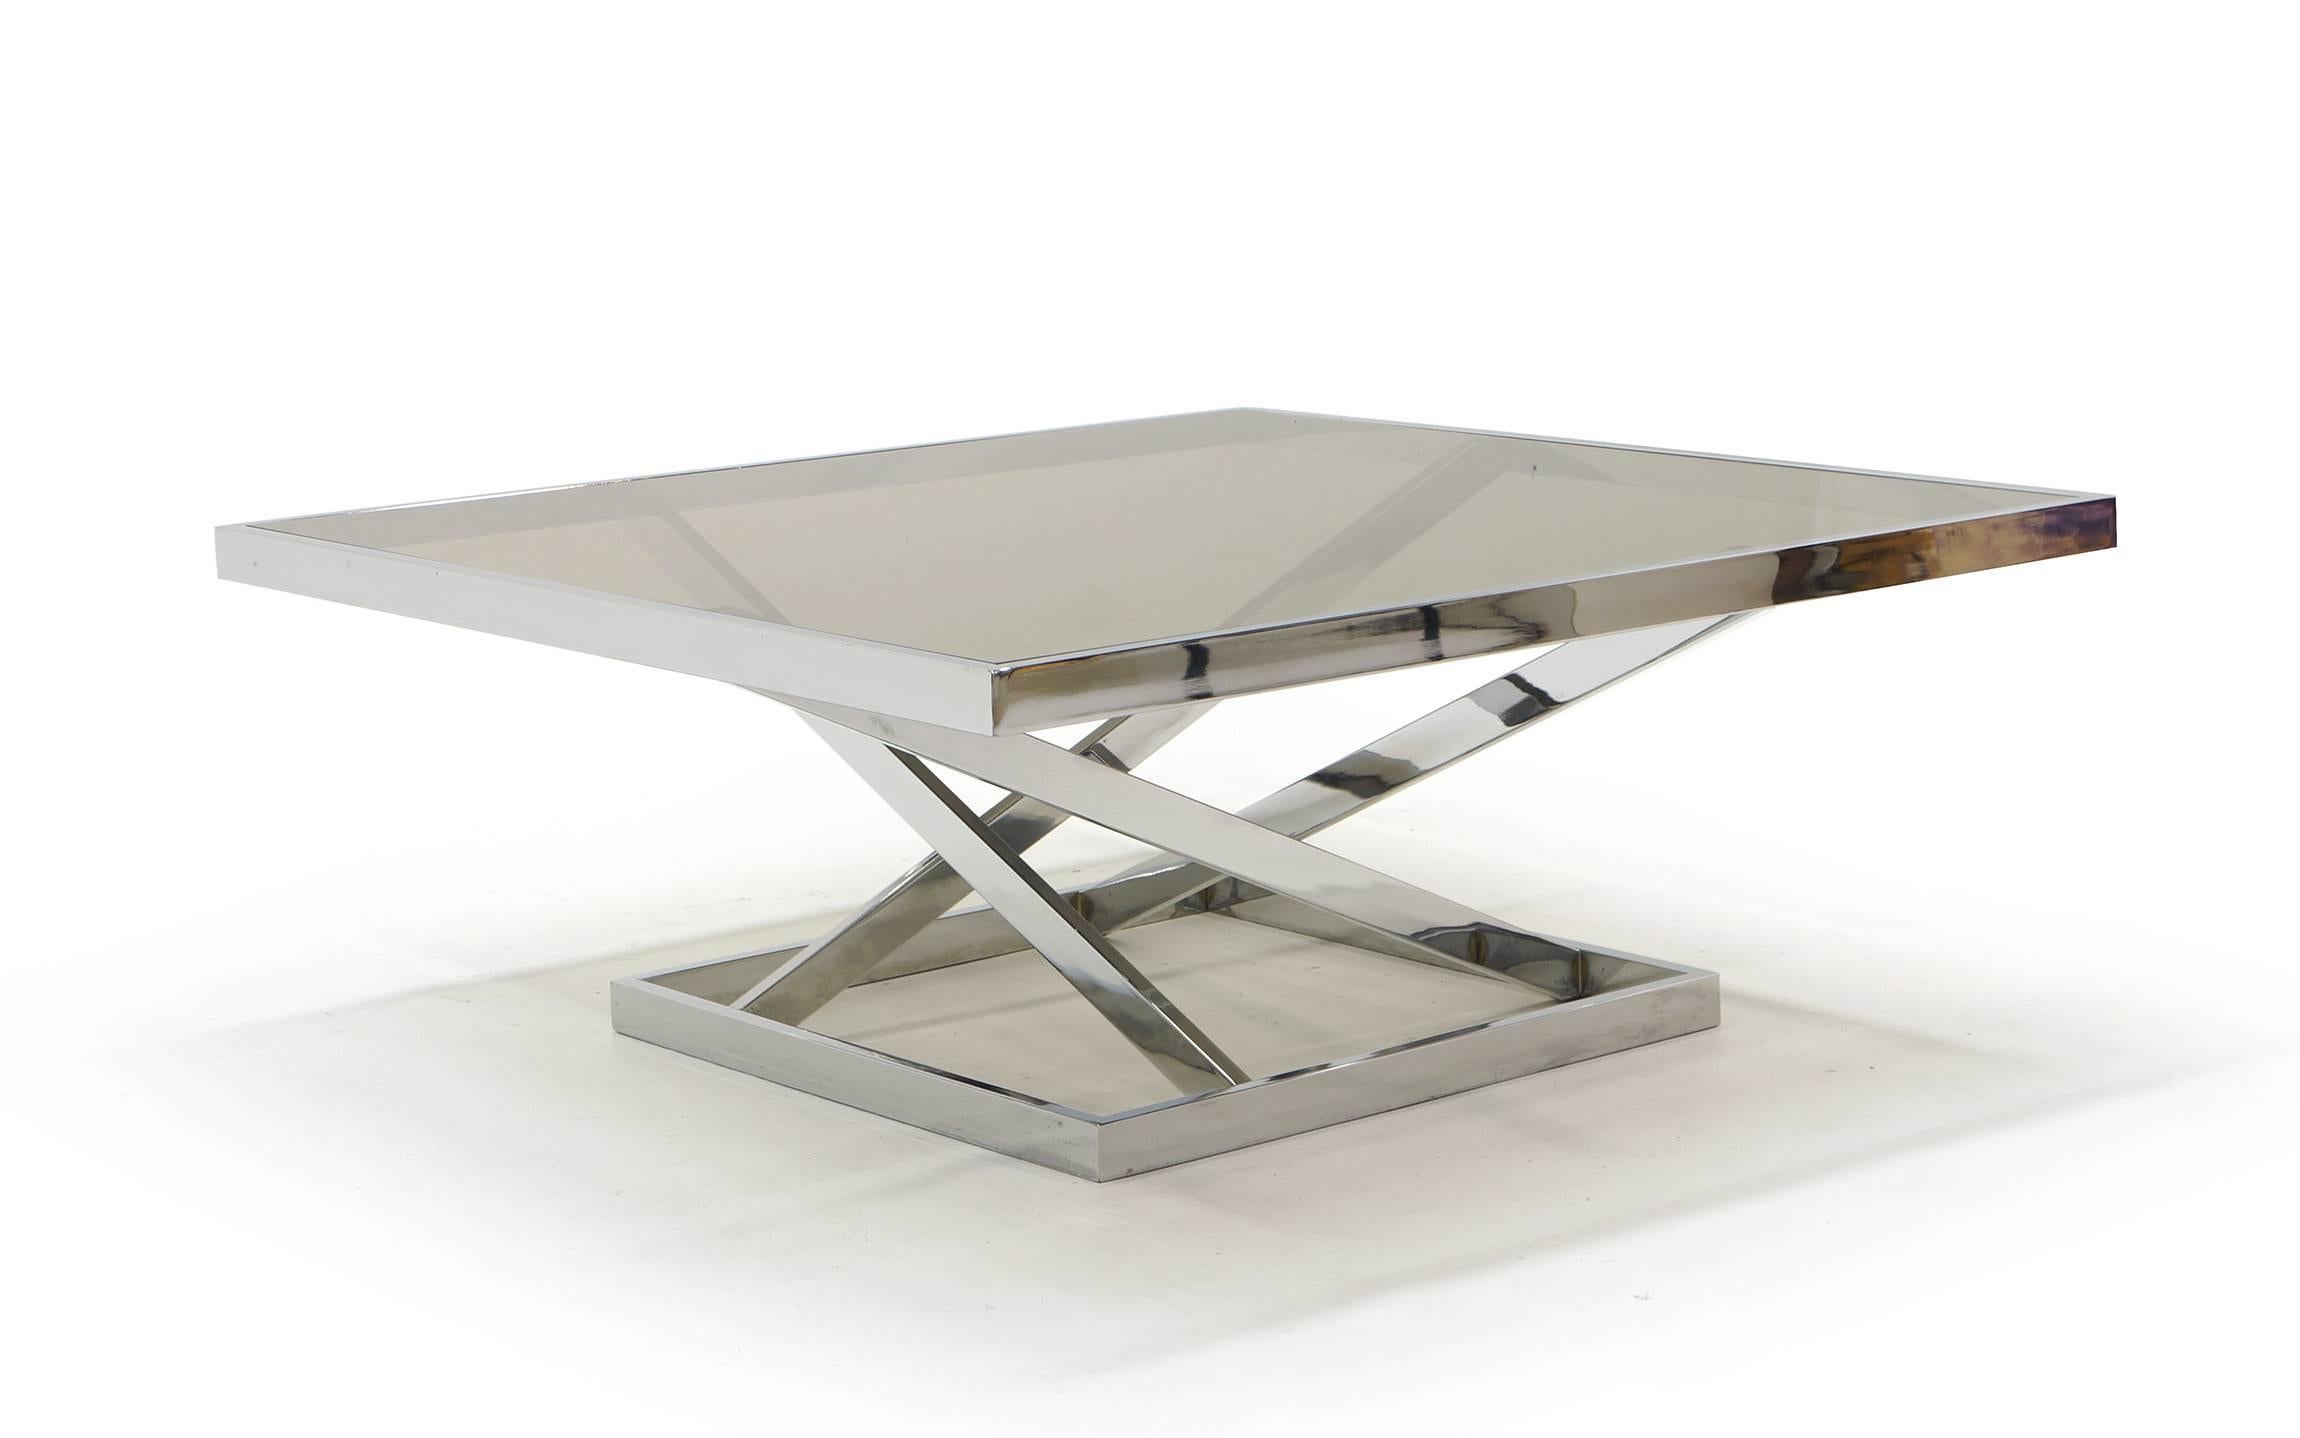 Square chrome and glass coffee table with a geometric angular shape to the base like none we have ever seen. The glass insets into the chrome frame. Very striking.